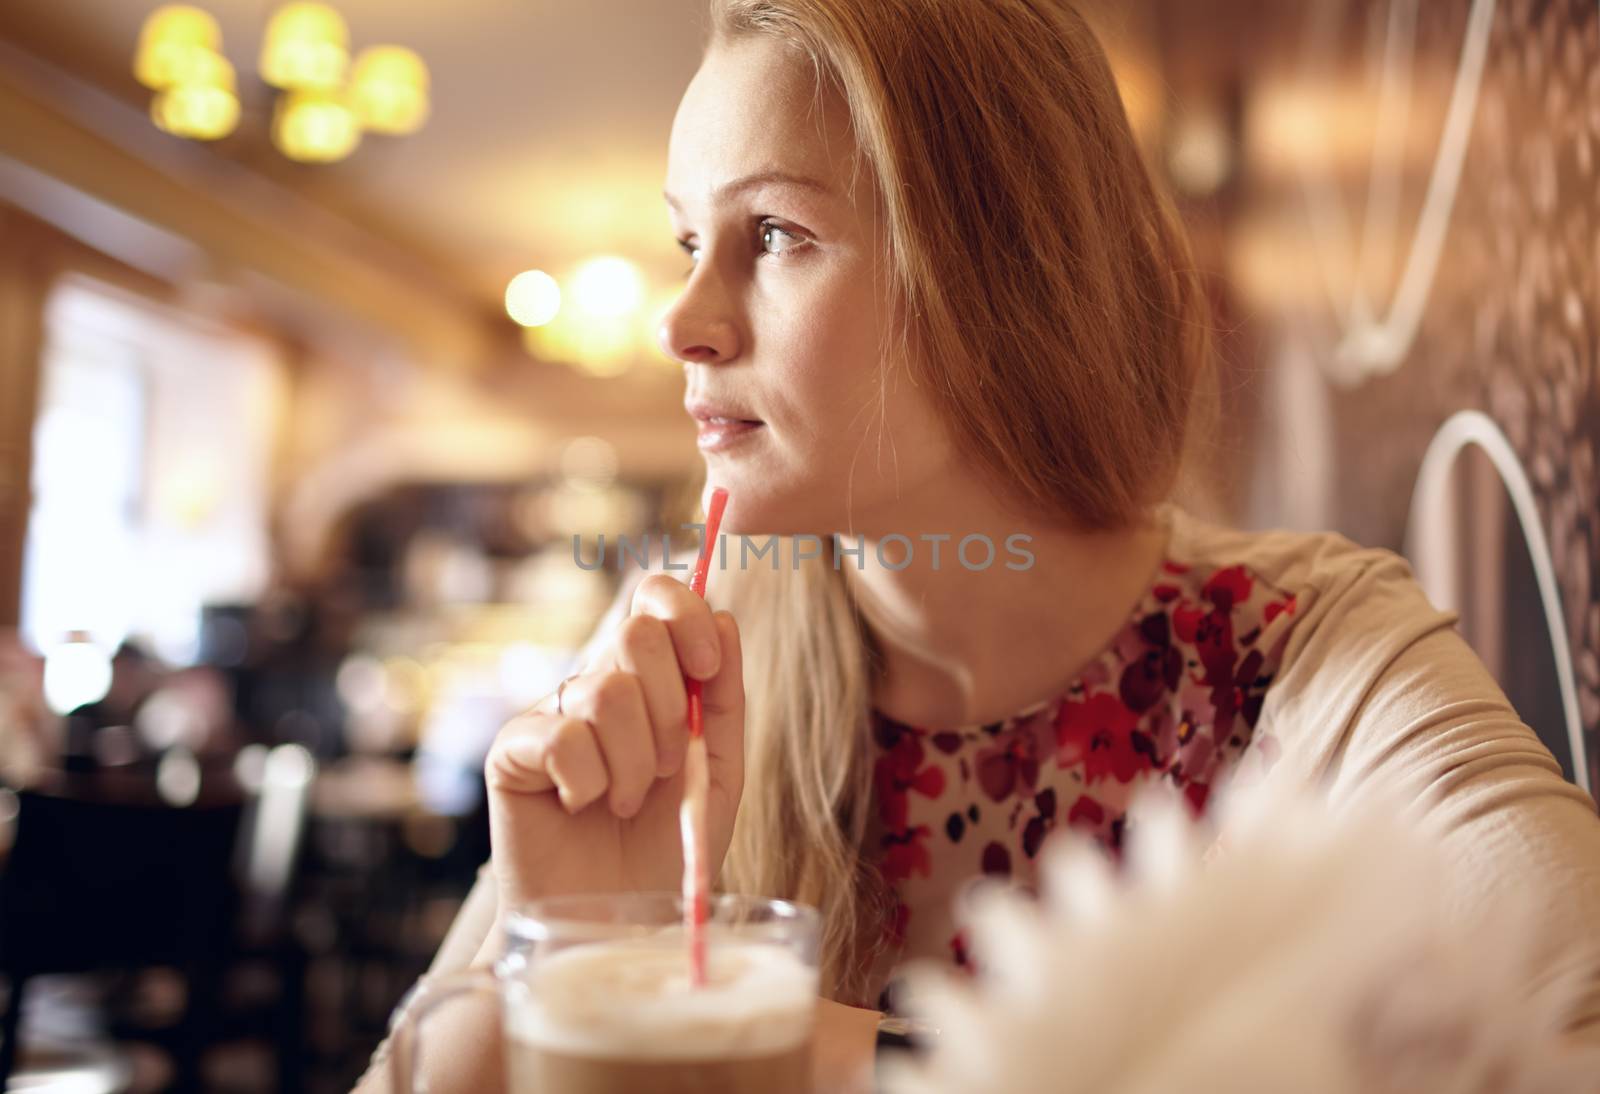 Portrait of girl enjoying coffee in cafe and looking through the window. Beautiful vintage interior in blur with natural sunlight.